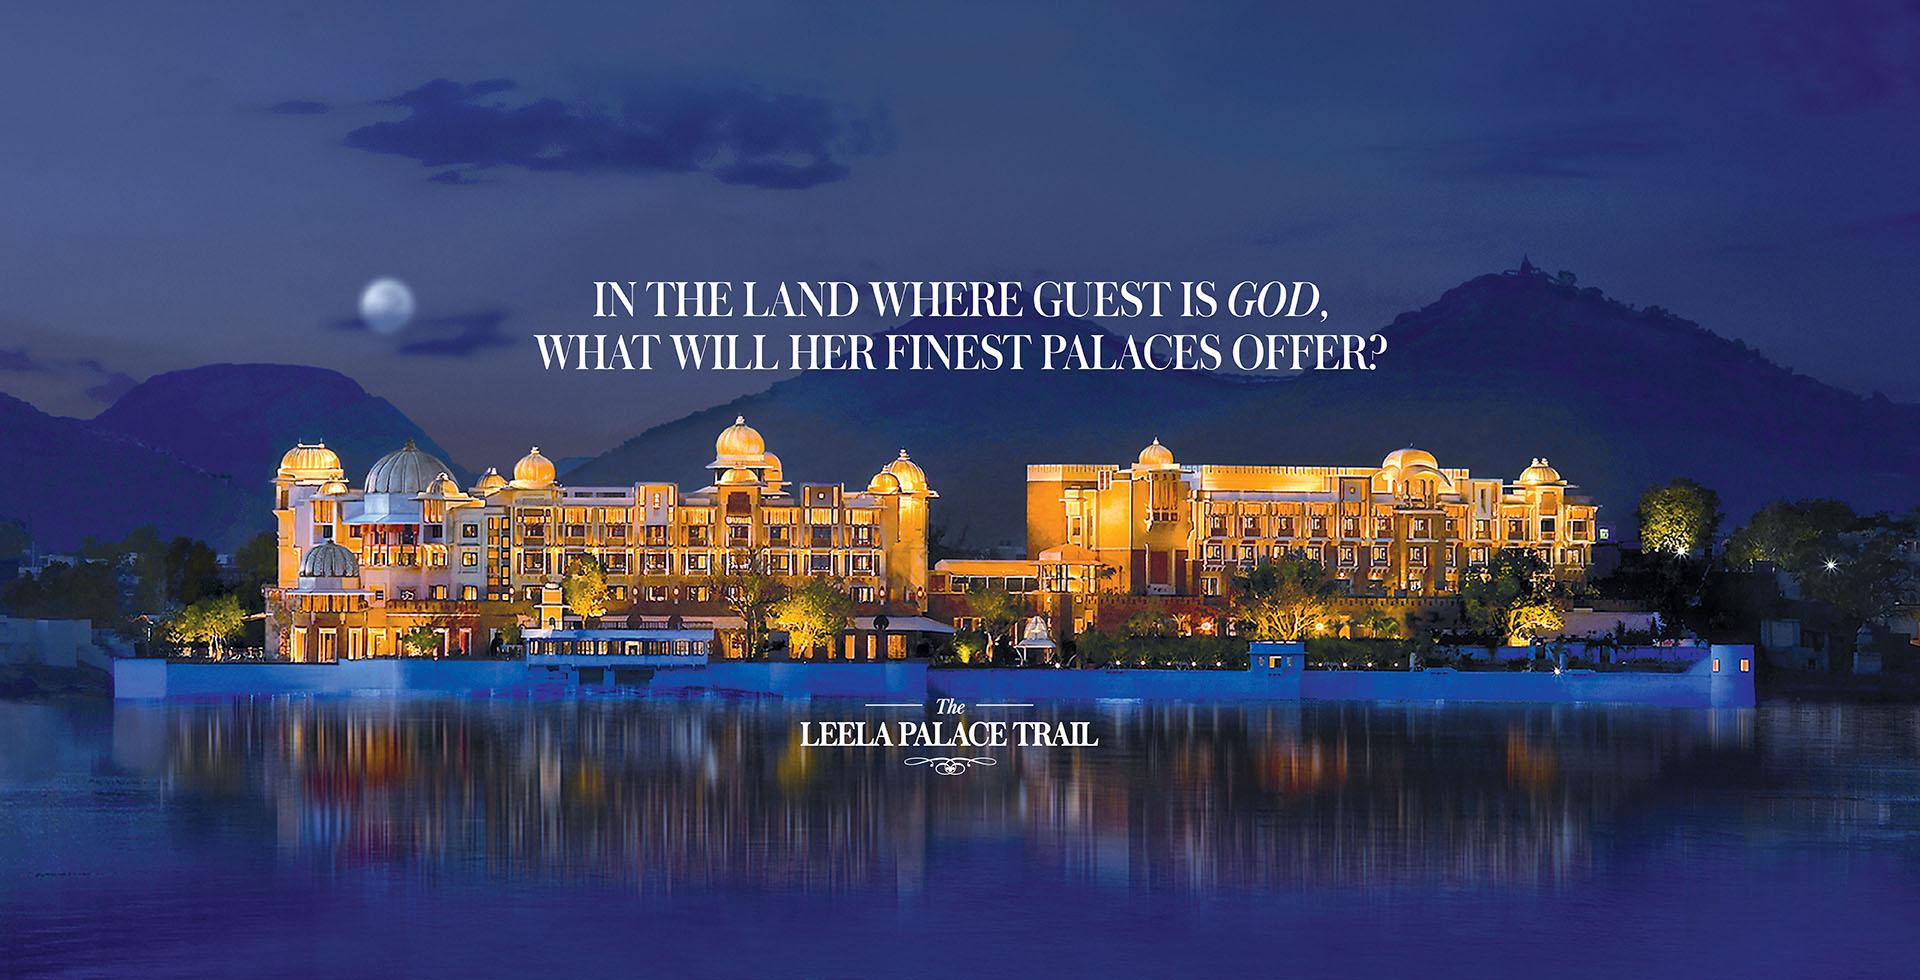 The Leela Palace Trail special offer